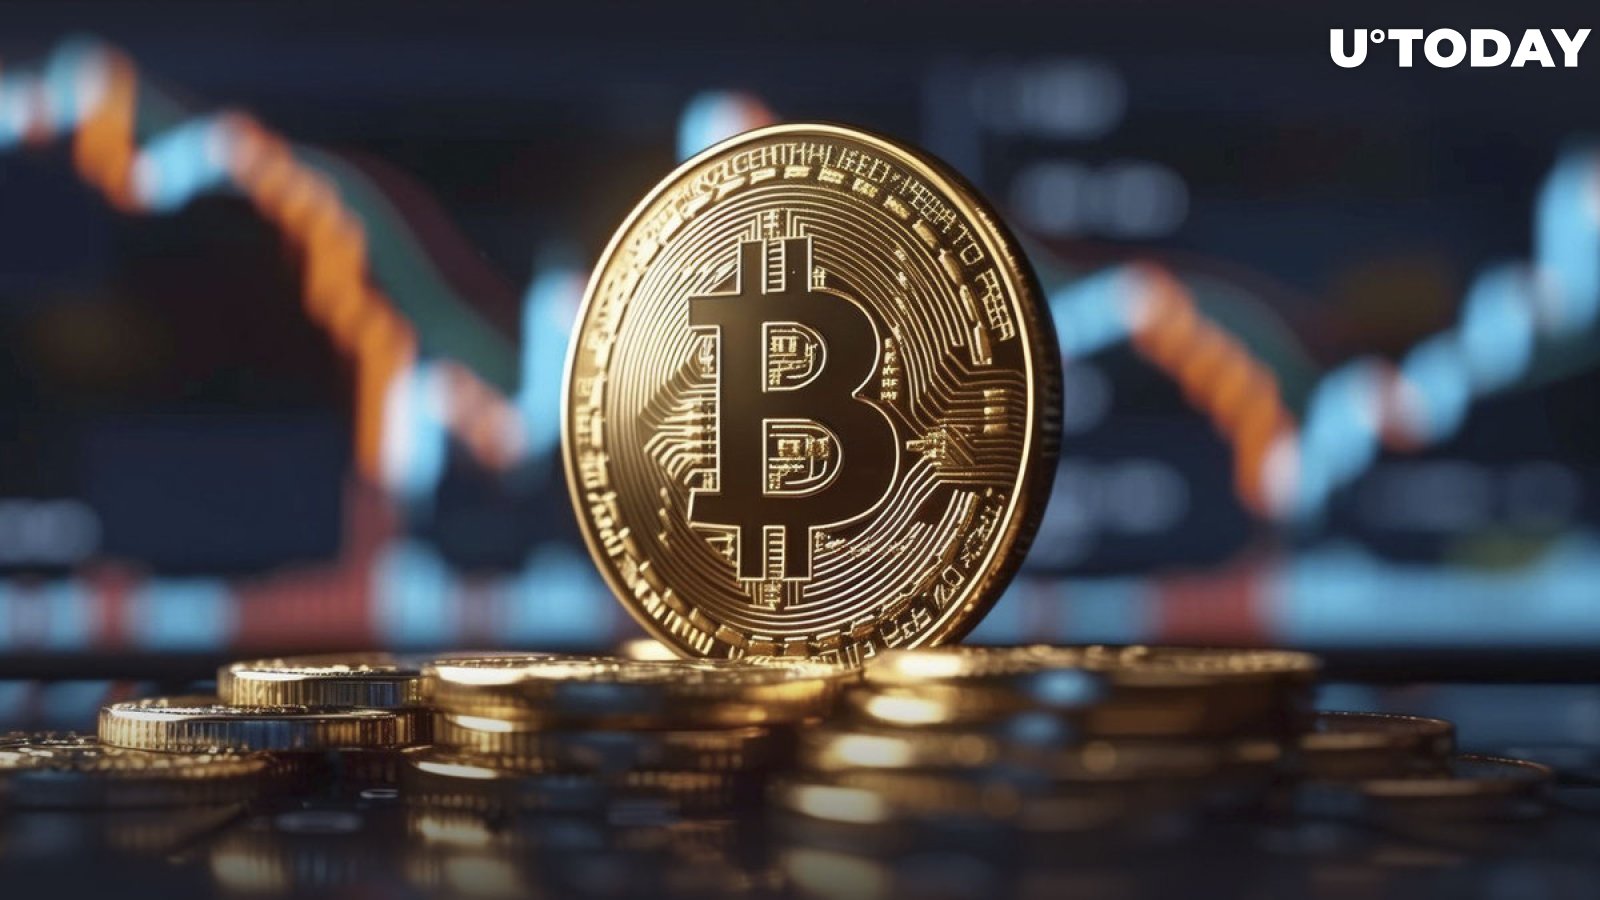 Yes, Bitcoin (BTC) Rallyed, But Bears Are in Control